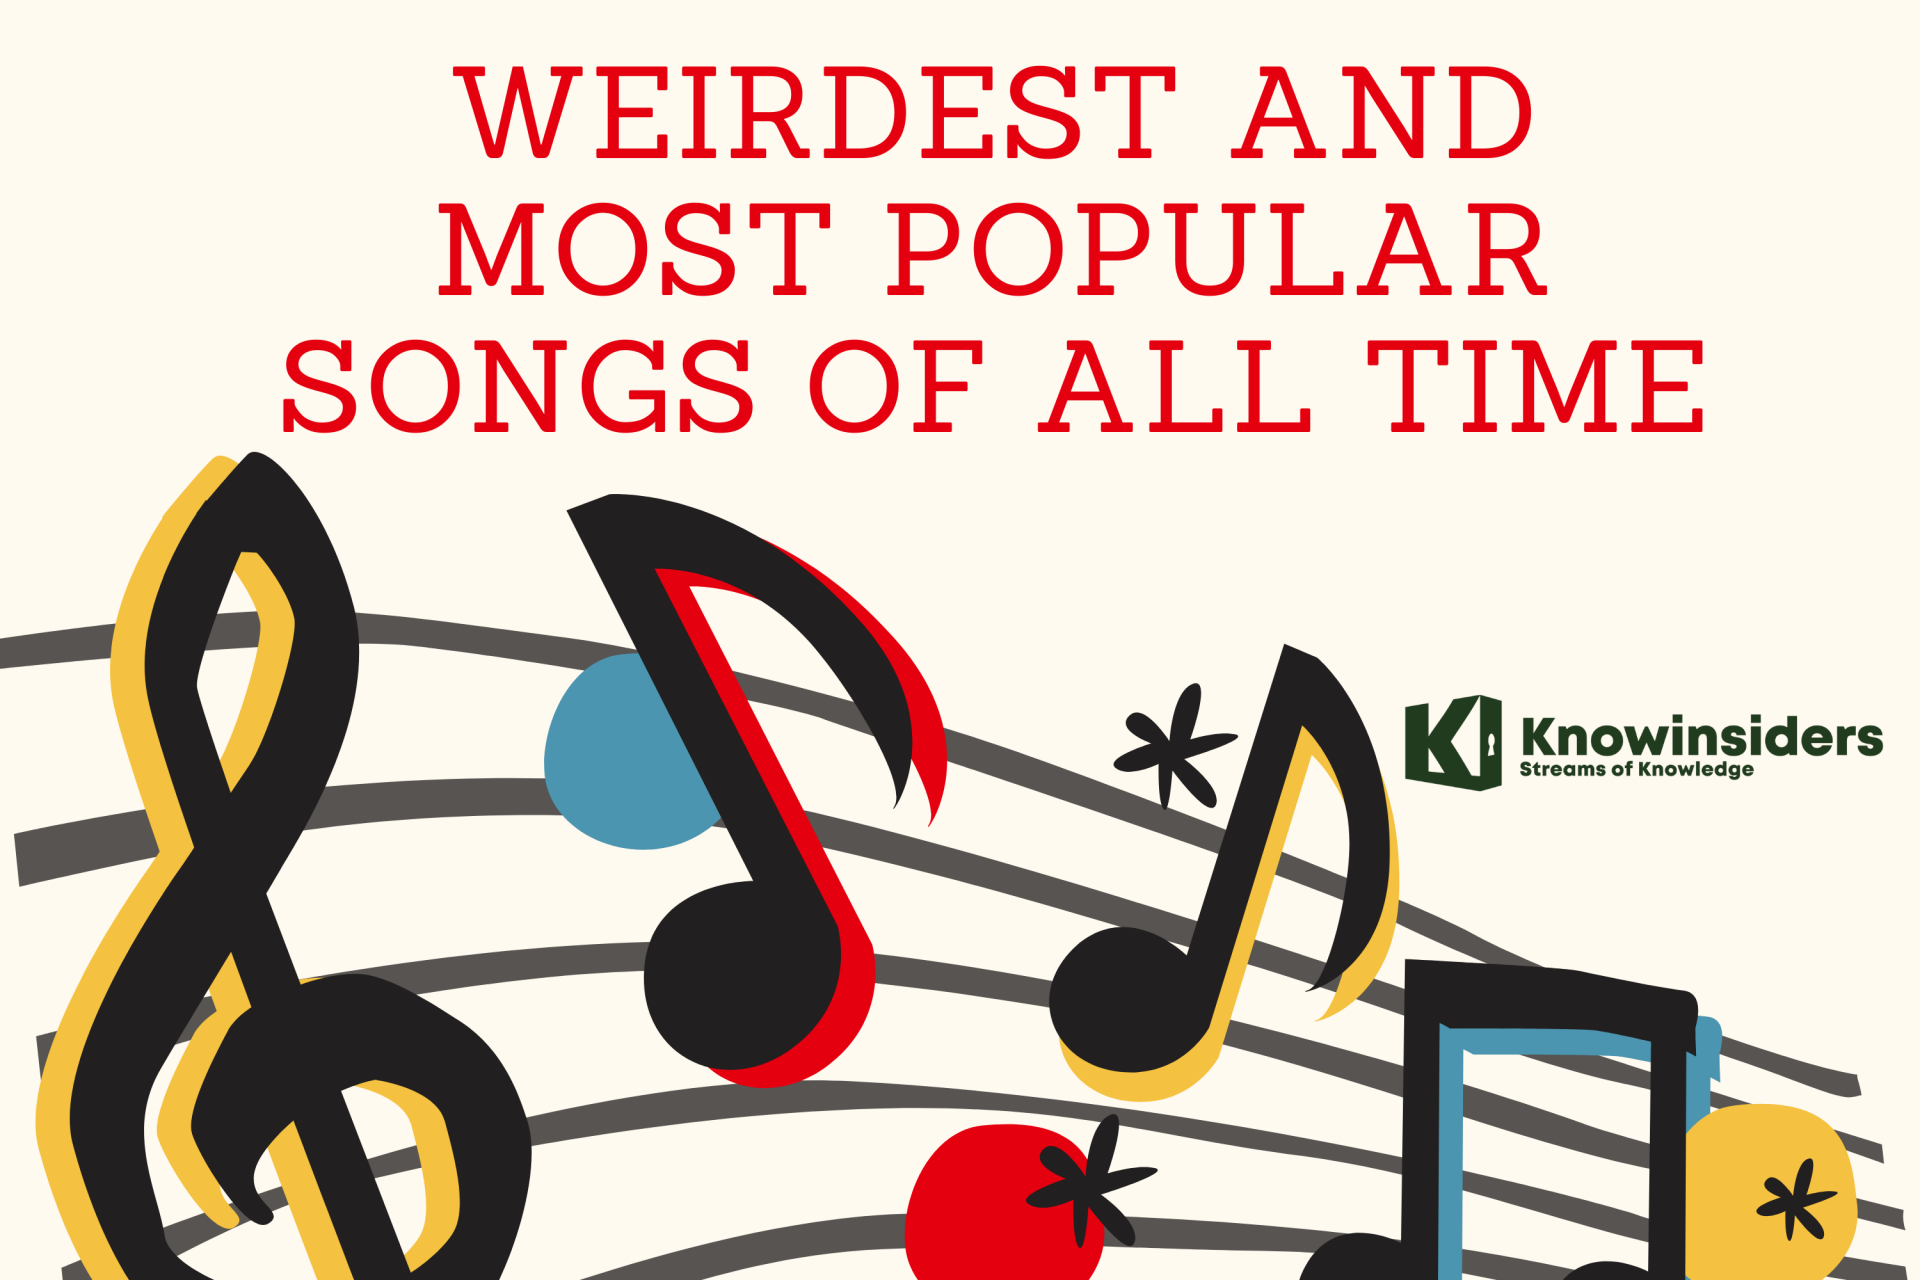 Top 20 Weirdest and Most Popular Songs of All Time